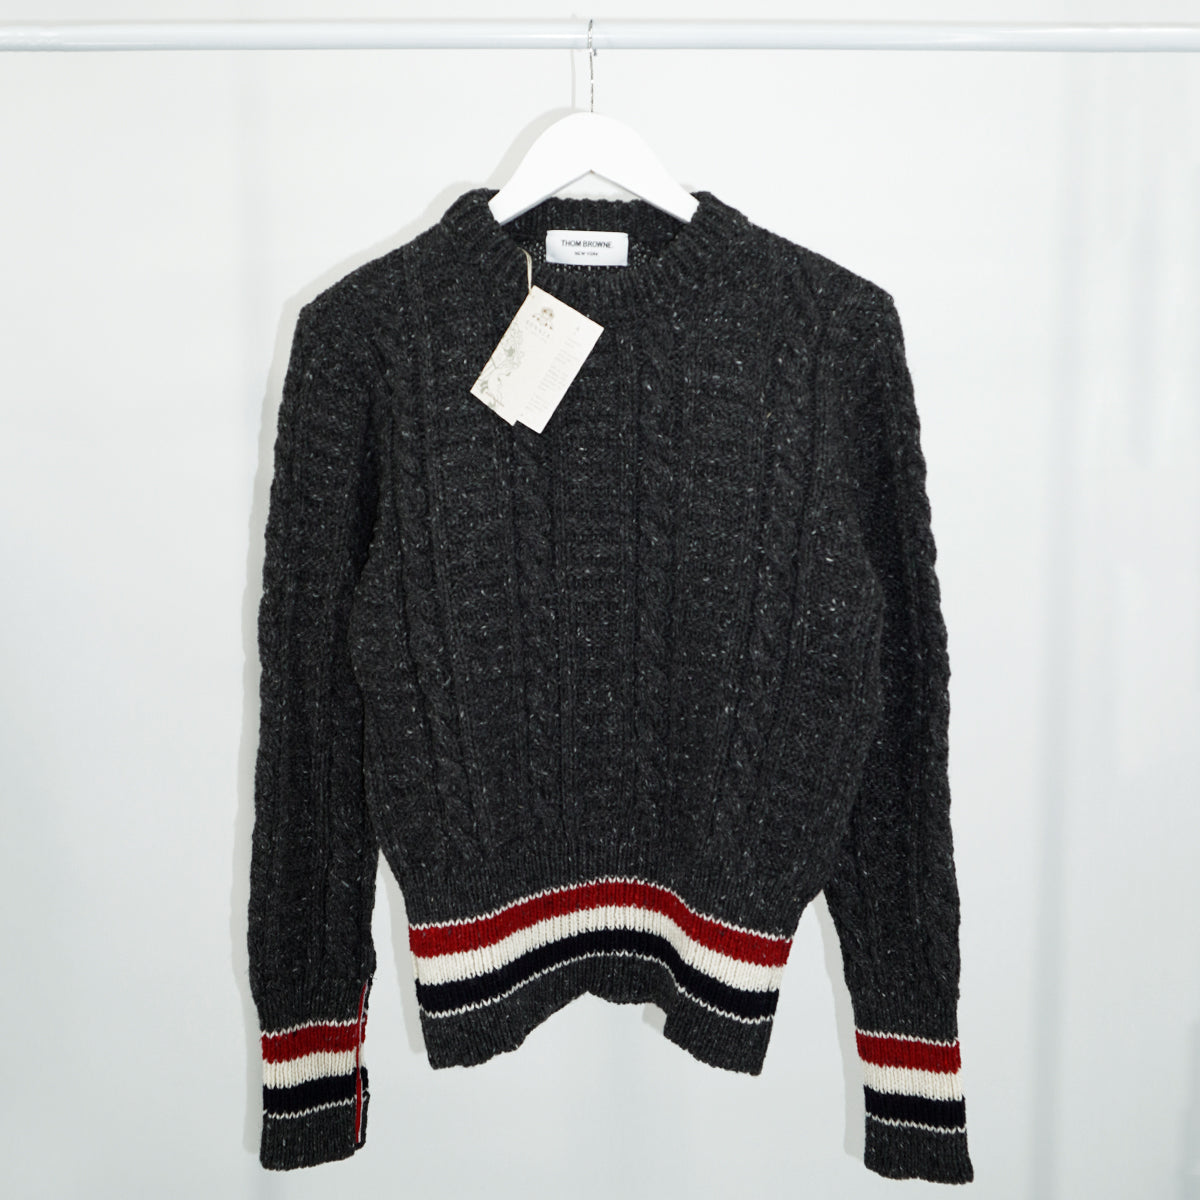 Thom Browne Mohair Mix Donegal Crew Knit Jumper in Grey